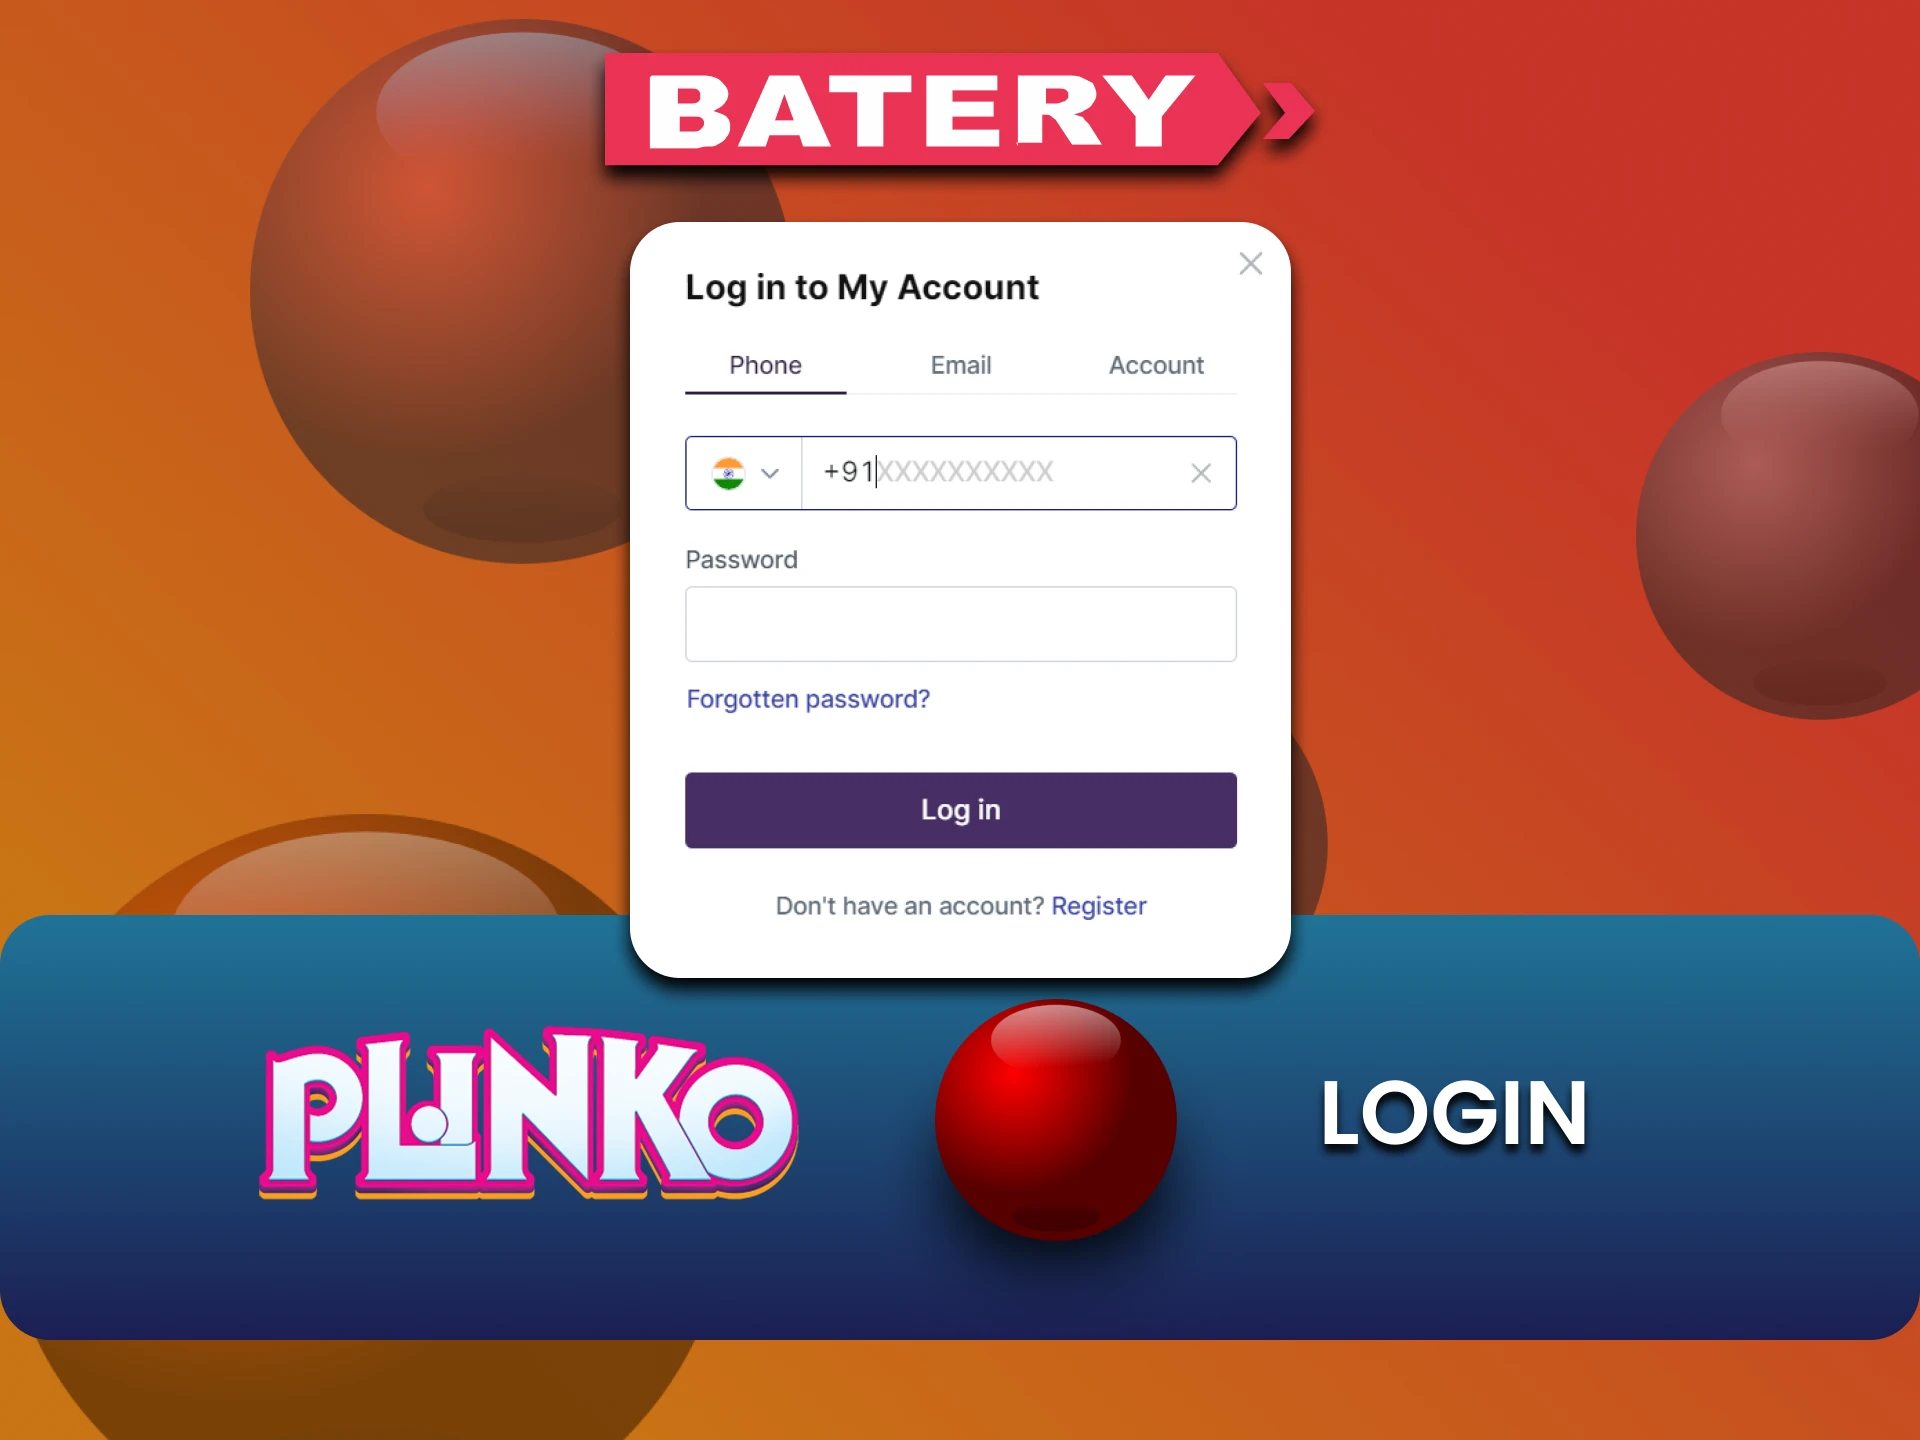 Log in to your Batery account and play Plinko.